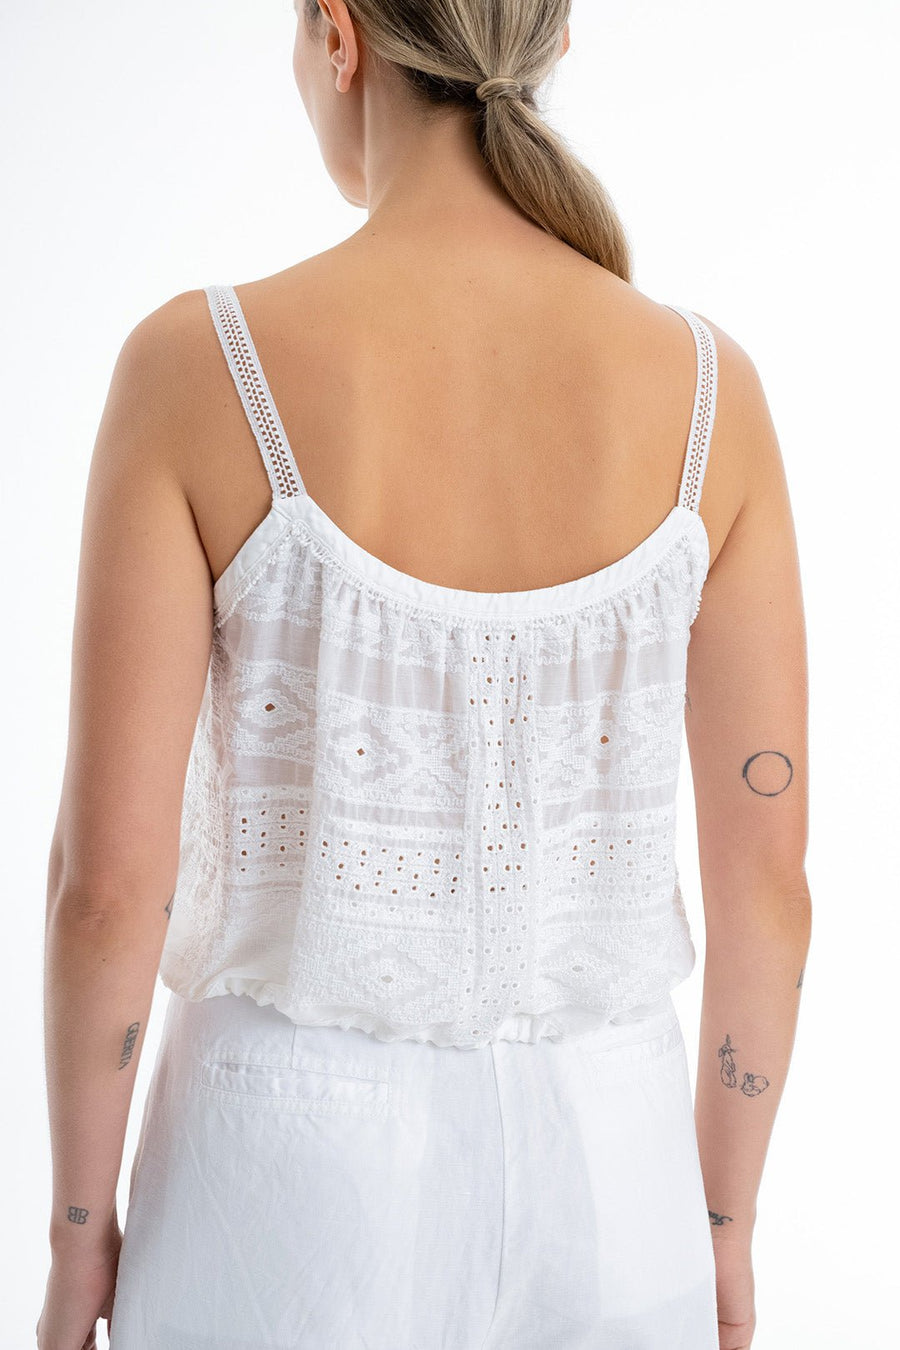 SKYE CAMI, WHITE - Burning Torch Online Boutique